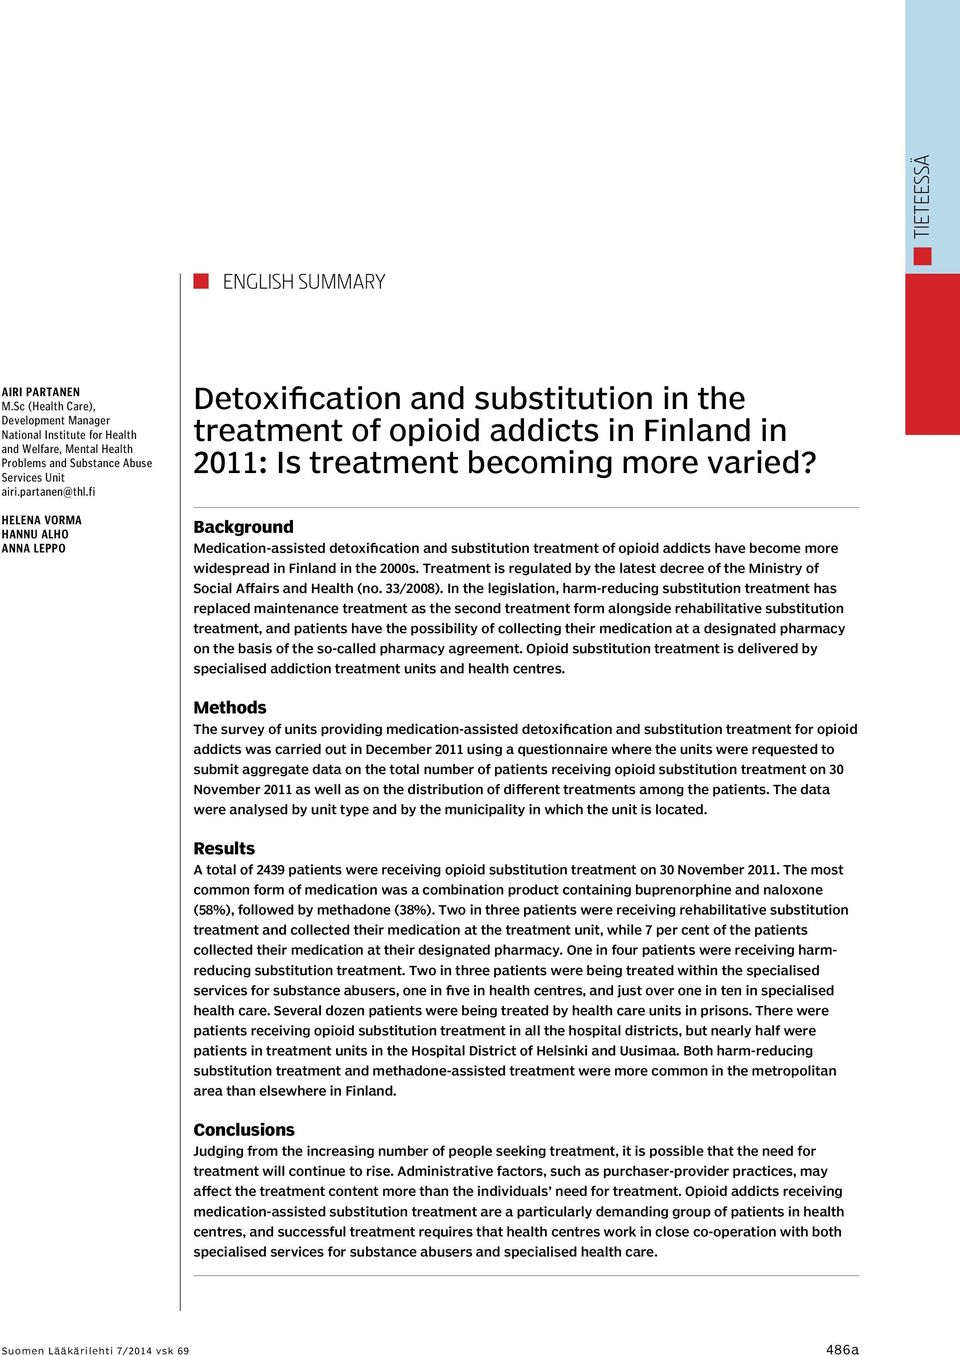 Background Medication-assisted detoxification and substitution treatment of opioid addicts have become more widespread in Finland in the 2000s.